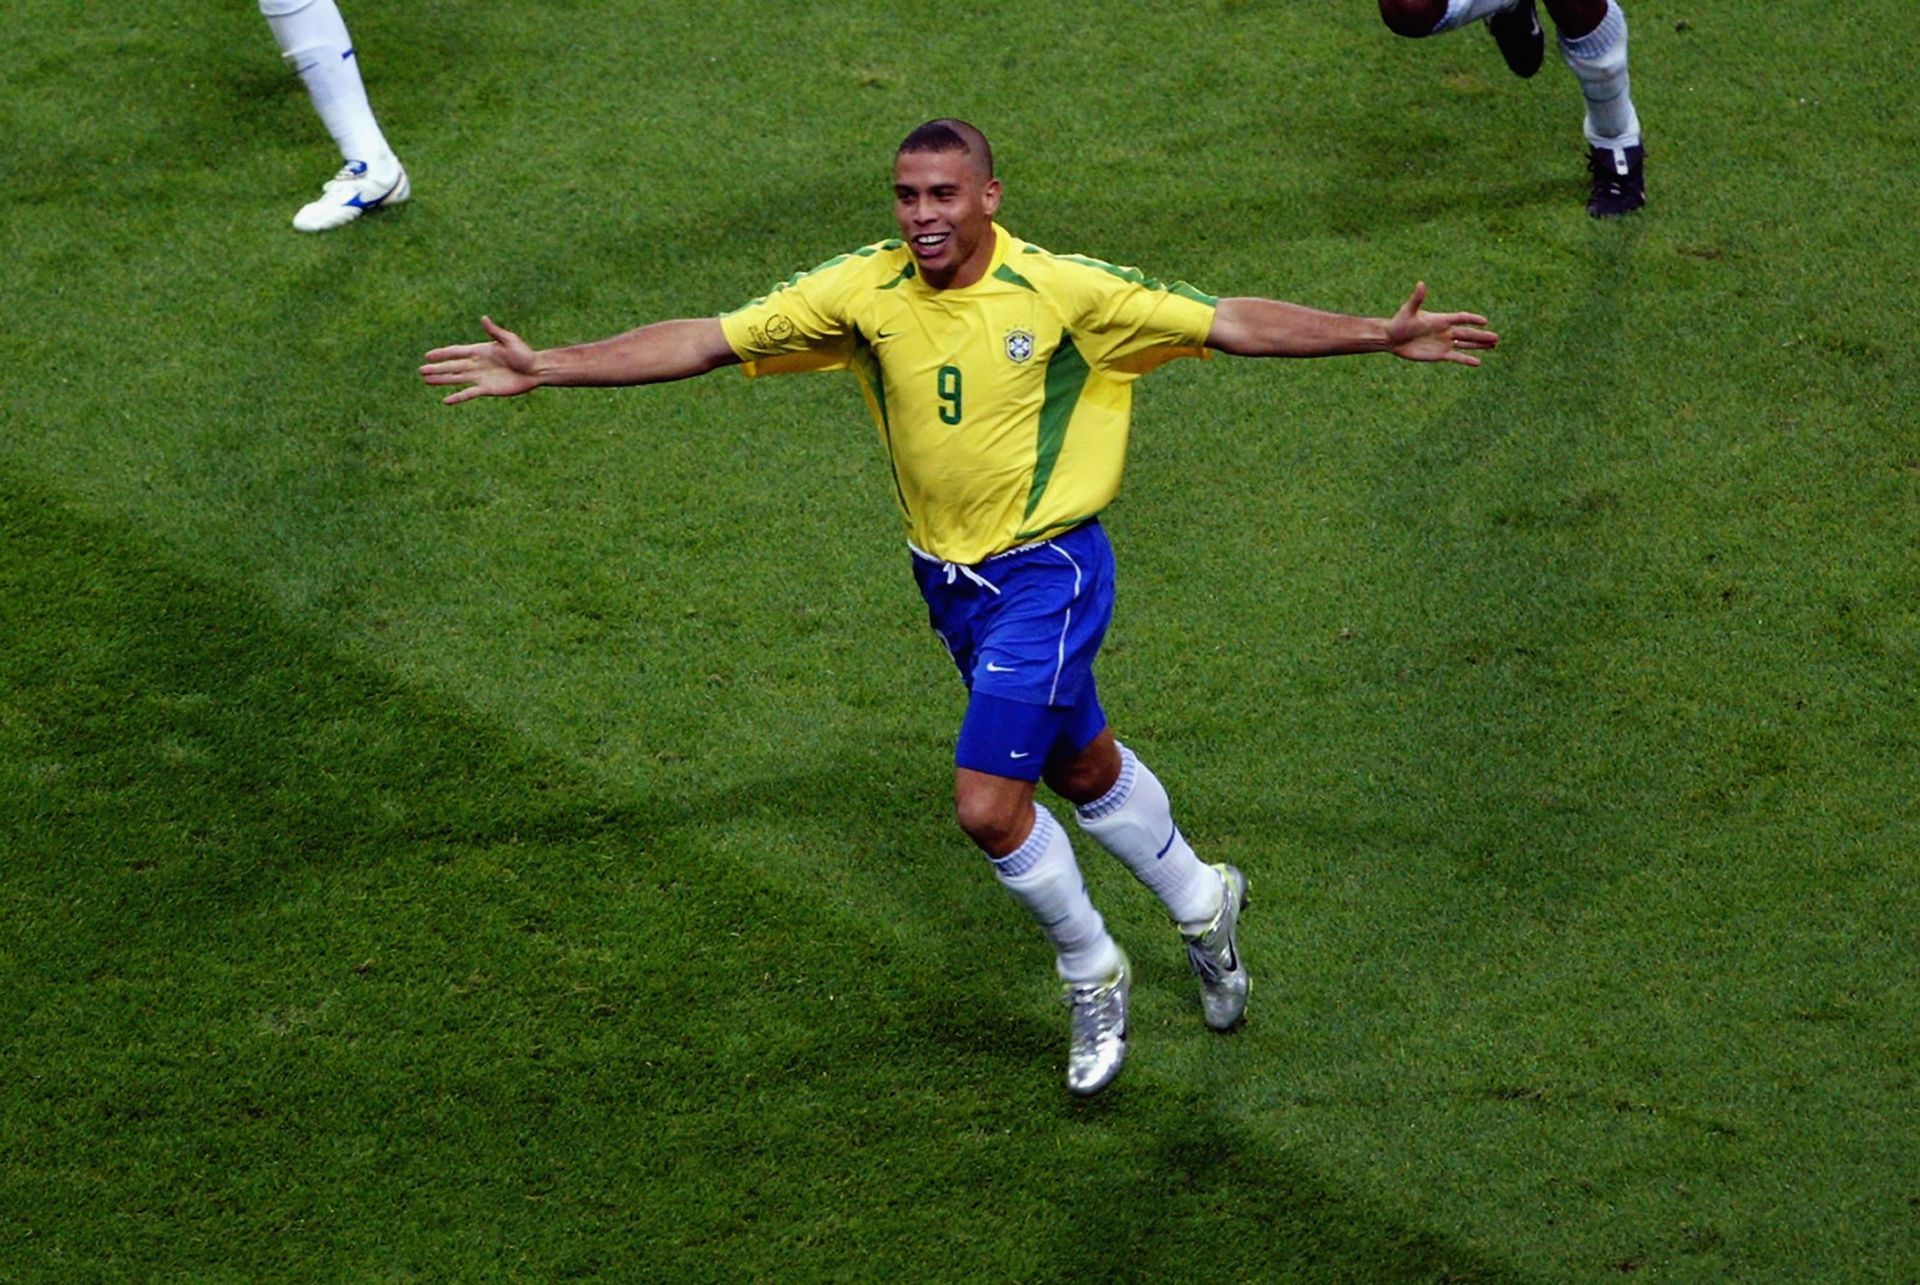 Ronaldo was a part of the 1994 and 2002 World Cup-winning Brazil teams